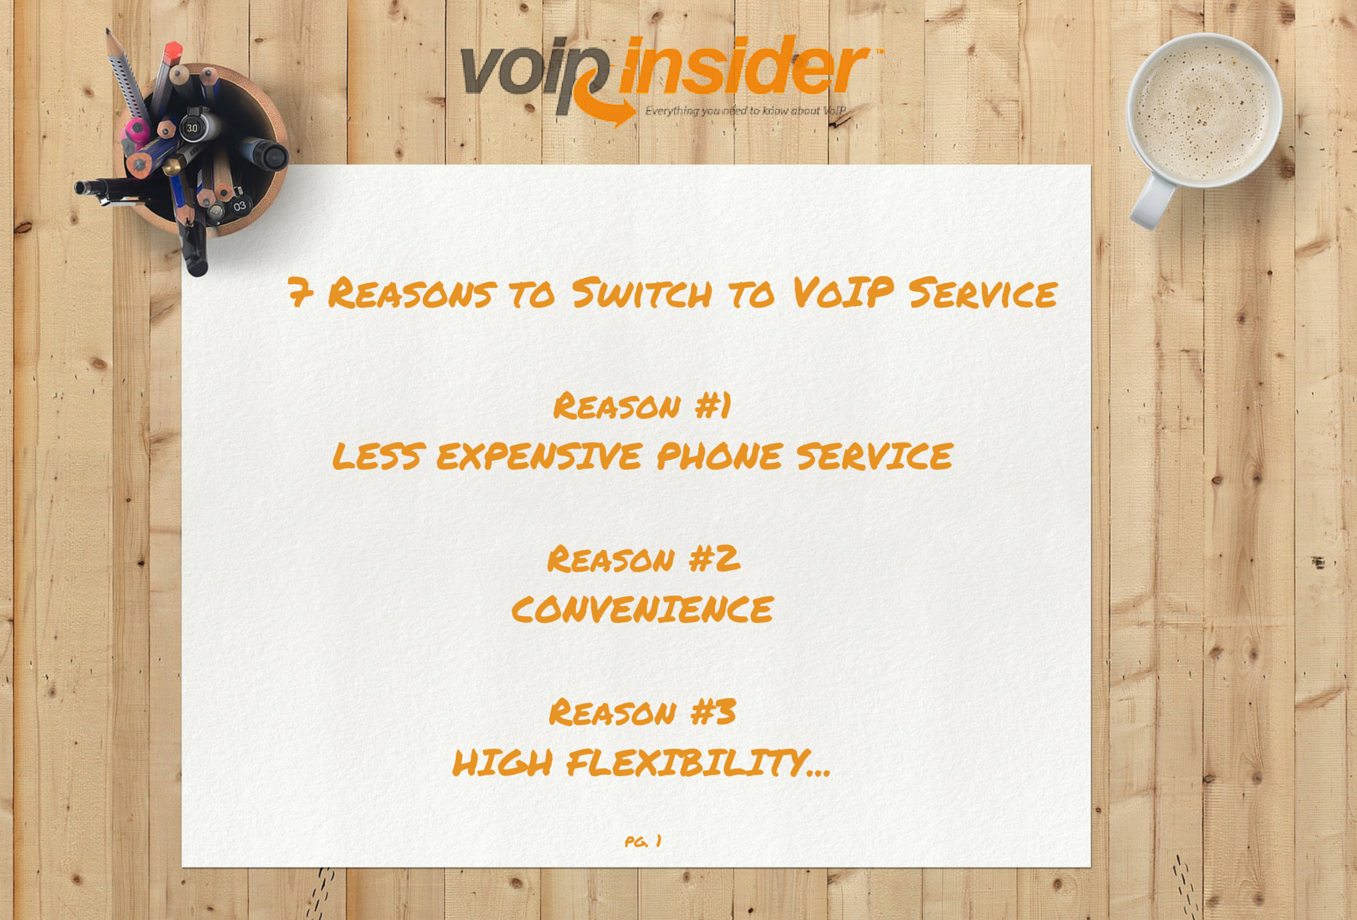 7 Reasons to Switch to VoIP Service (1)